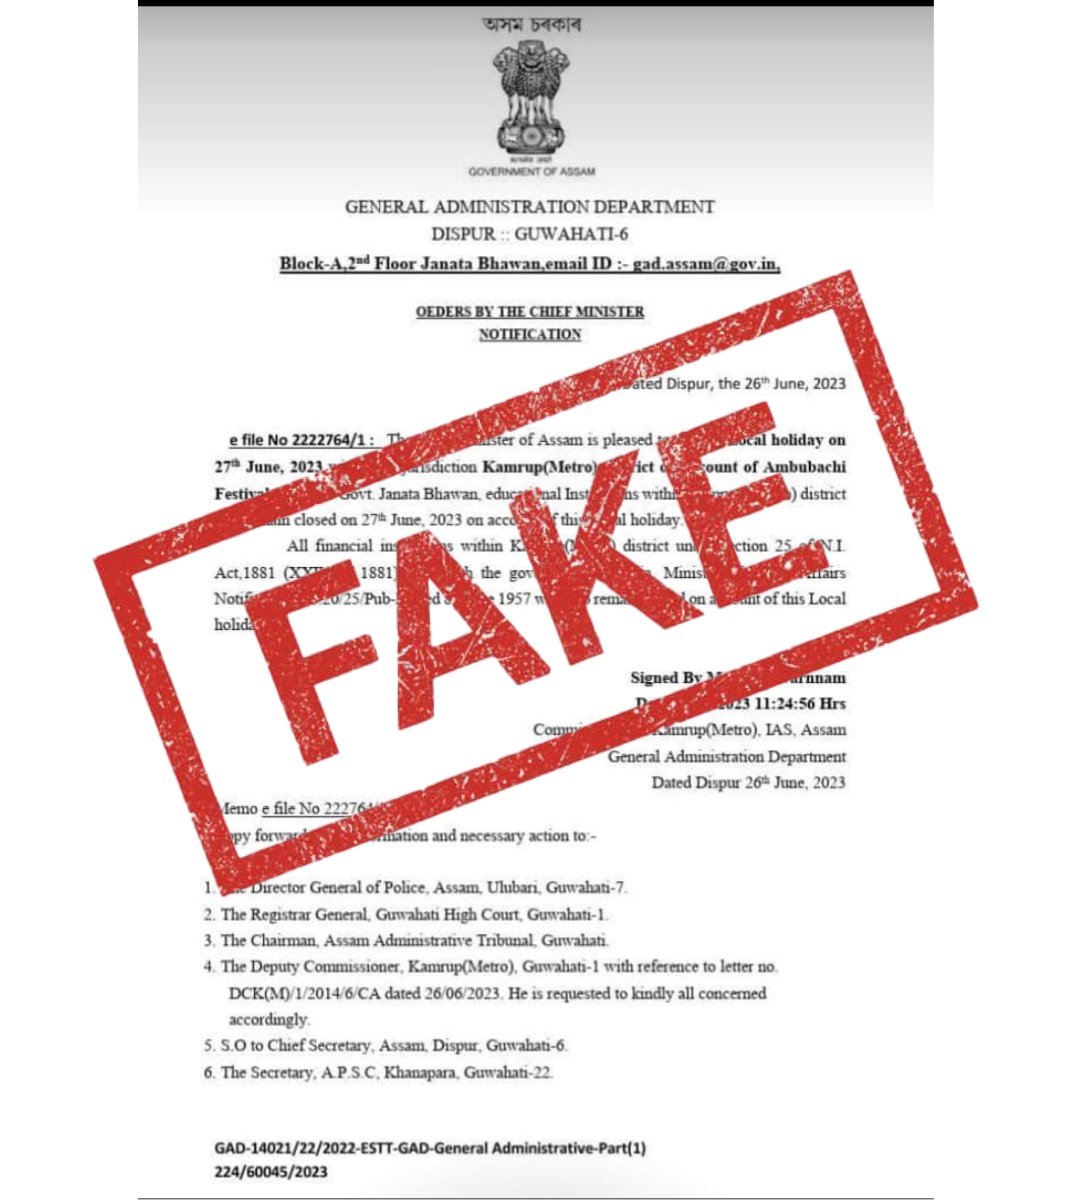 A Fake Circular pretending to be one issued by the General Administration Department is being circulated on Social Media.

Citizens are requested not to fall for such Fake Messages.

Strict action to be taken against those found sharing such misinformation.

#ThinkBeforeYouShare